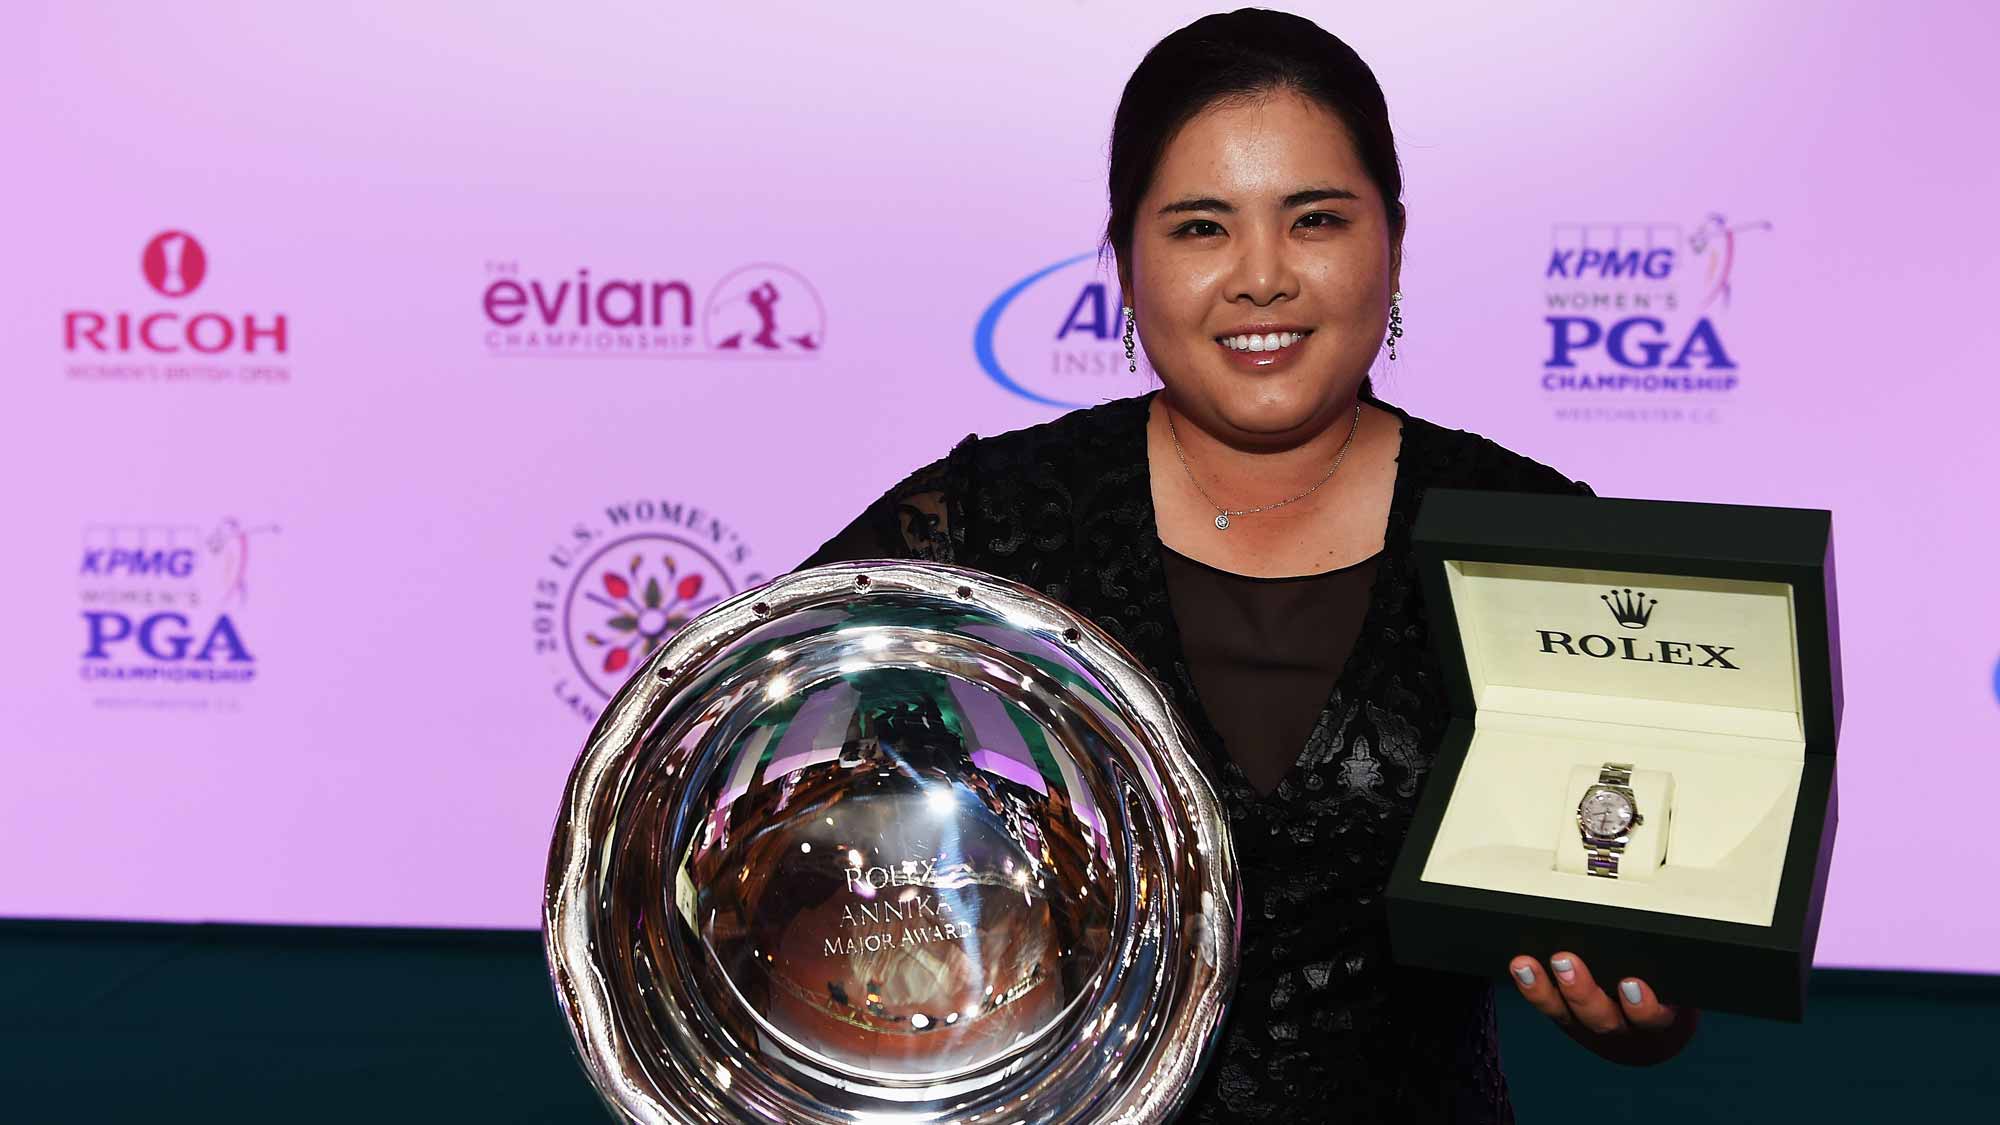 Inbee Park holds the Rolex Annika Major Award at the Rolex Award ceremony after the third round of the Evian Championship